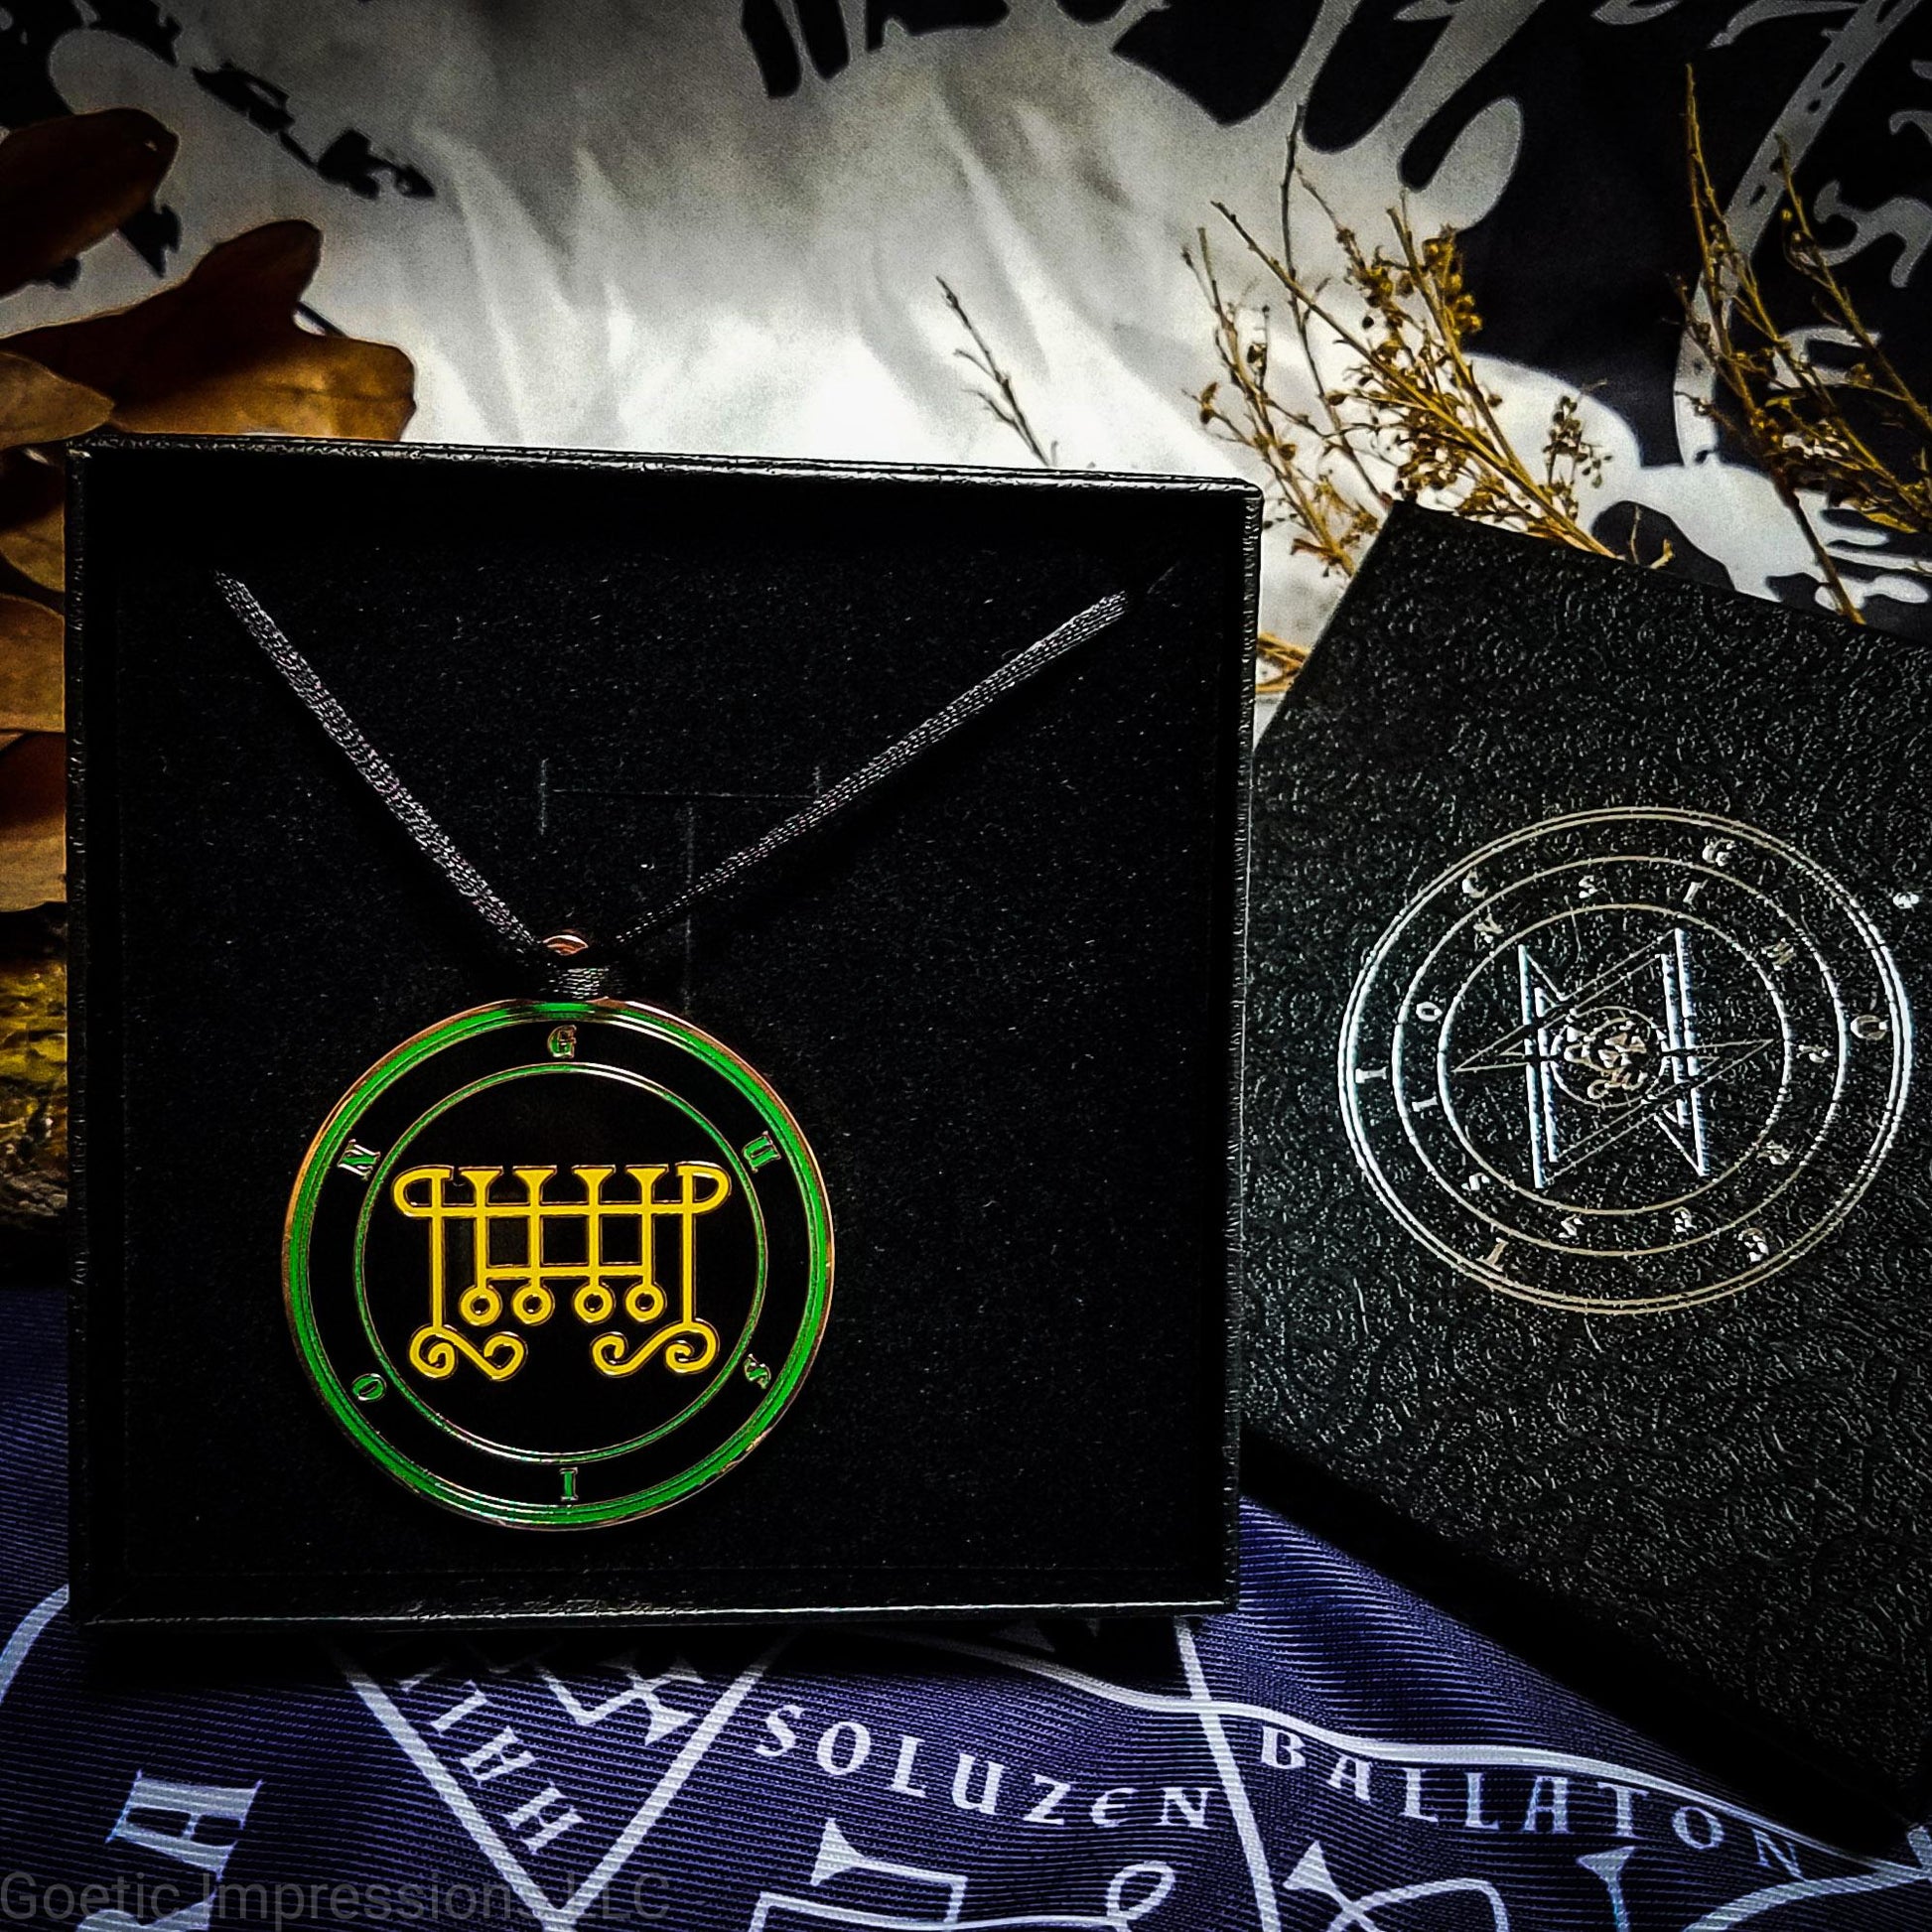 Necklace of Gusion in a Goetic Impressions gift box stamped in silver foil. The sigil for Gusion is yellow. Gusion's name is surrounding the sigil with concentric circles in green on a black background. The seal is copper plated. The box is on a purple altar cloth with the Tetragrammaton in white.